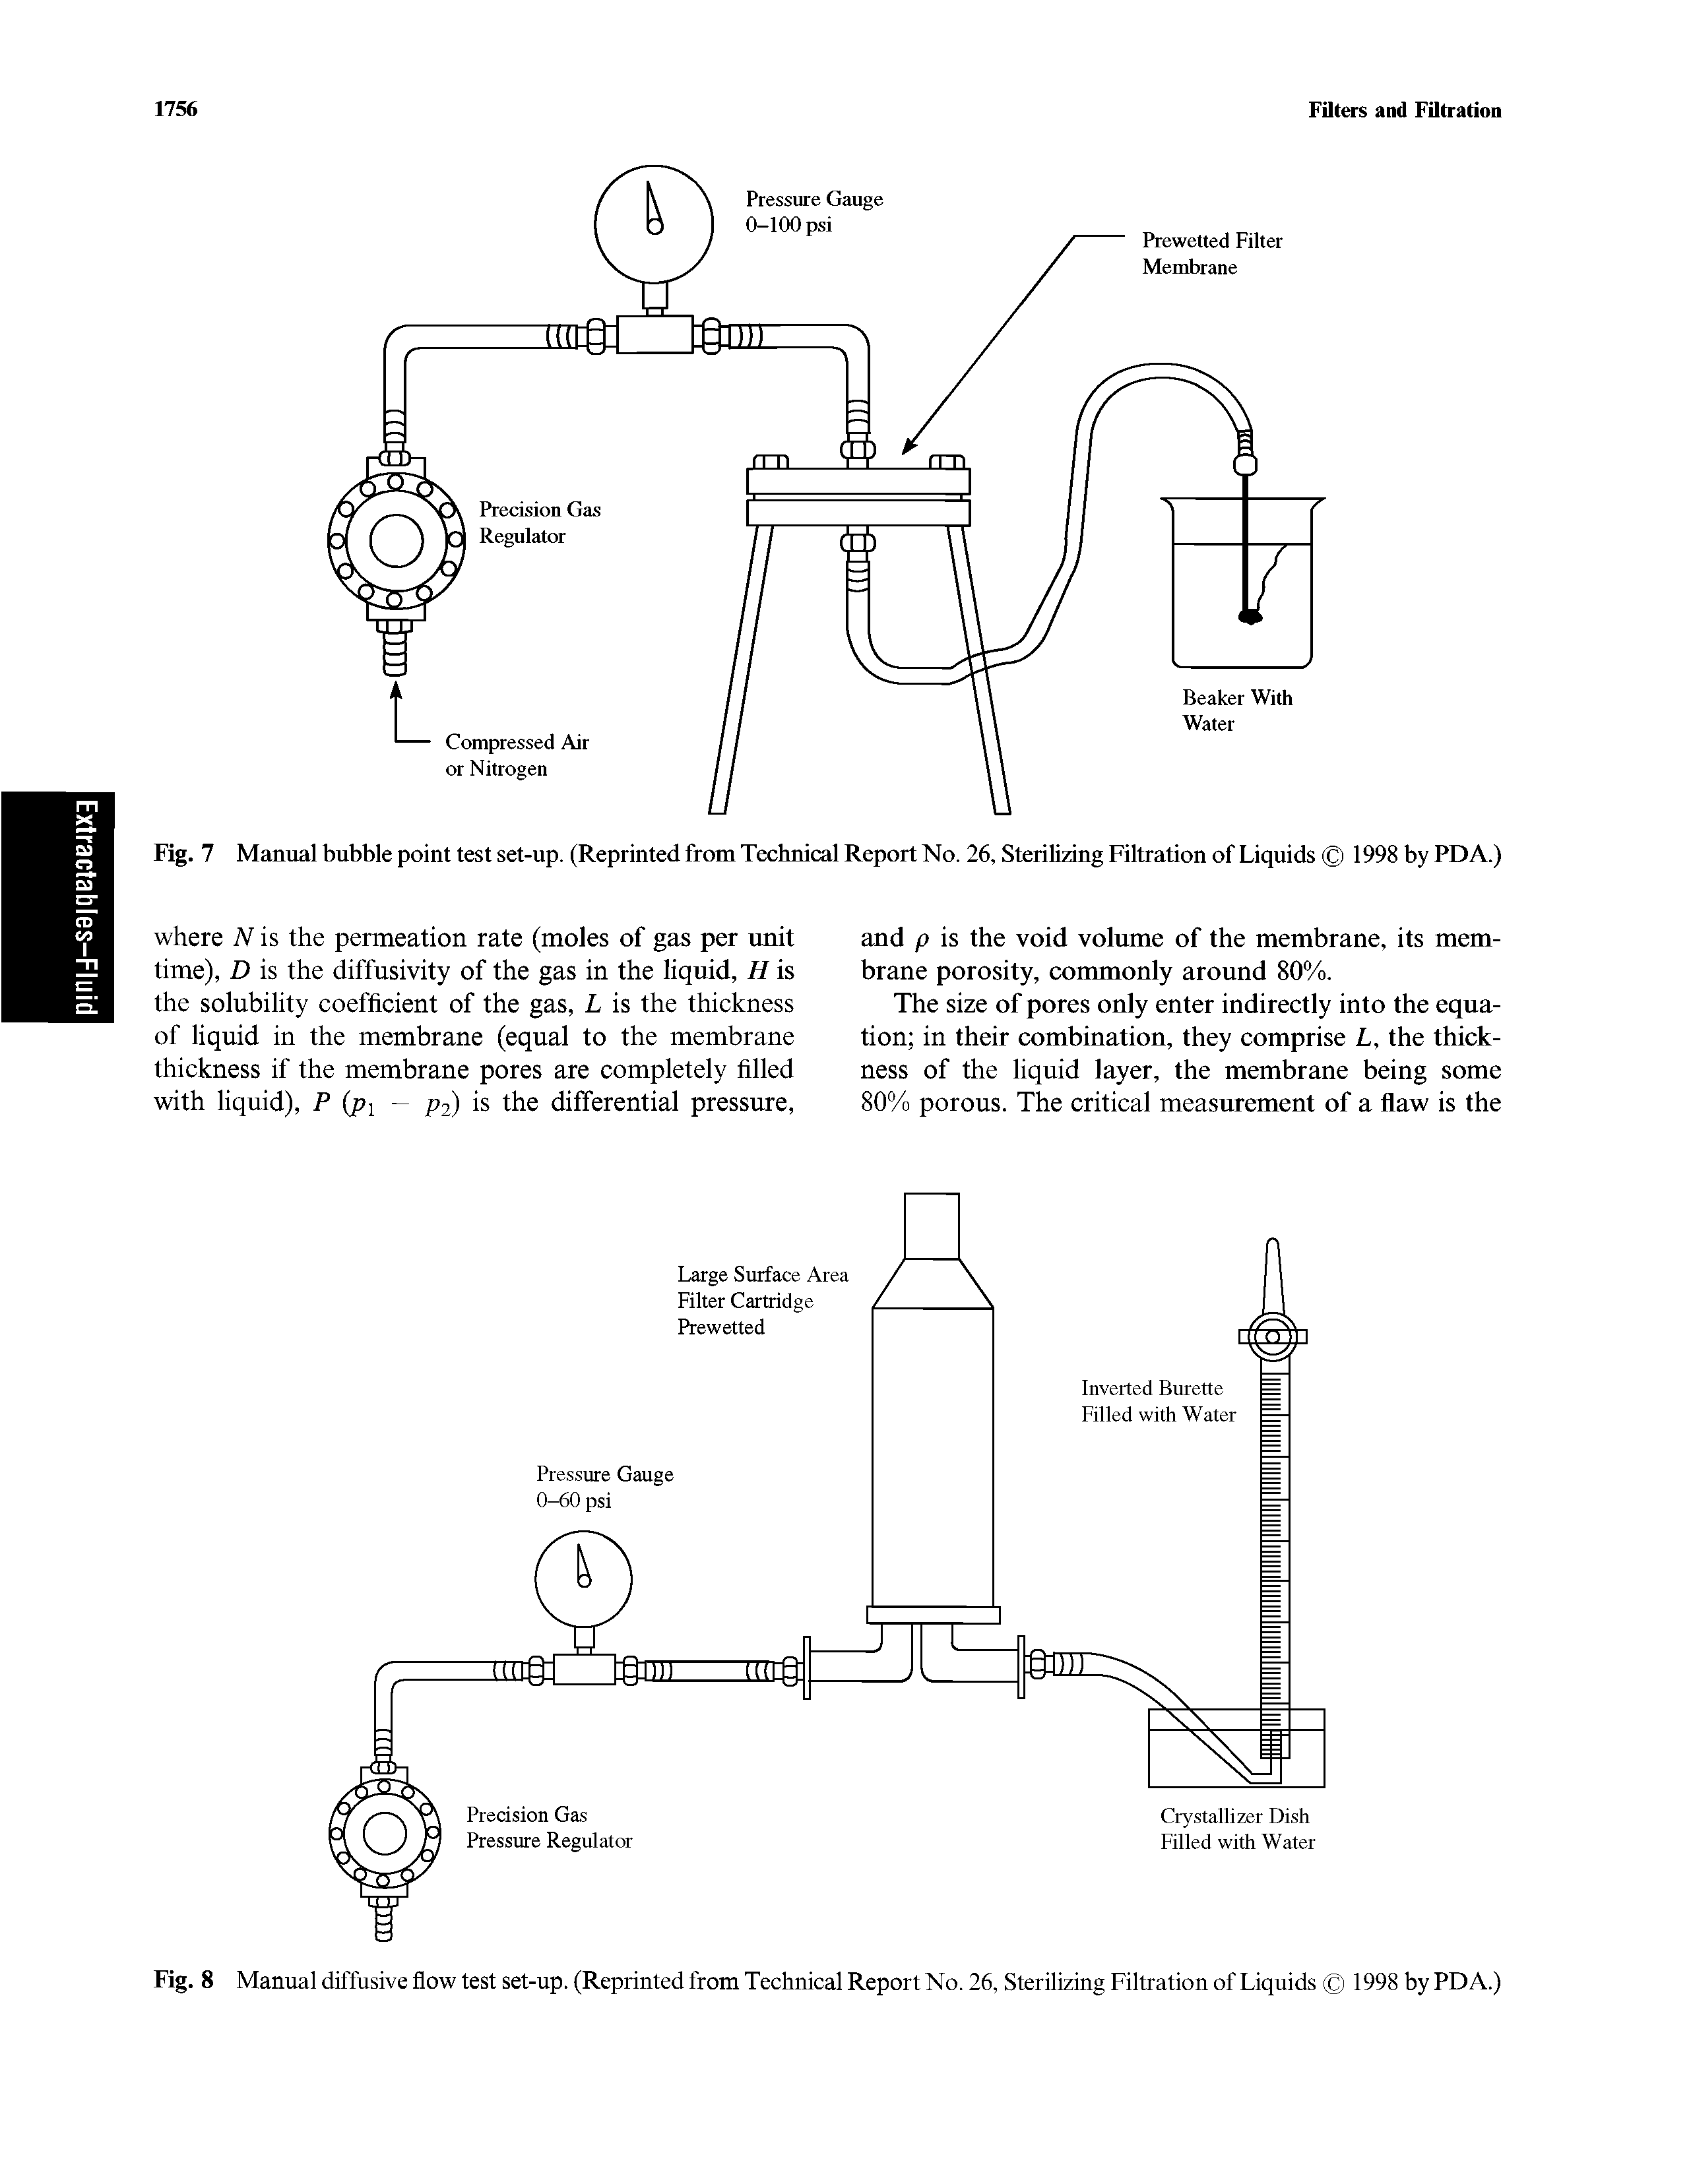 Fig. 7 Manual bubble point test set-up. (Reprinted from Technical Report No. 26, Sterilizing Filtration of Liquids 1998 by PDA.)...